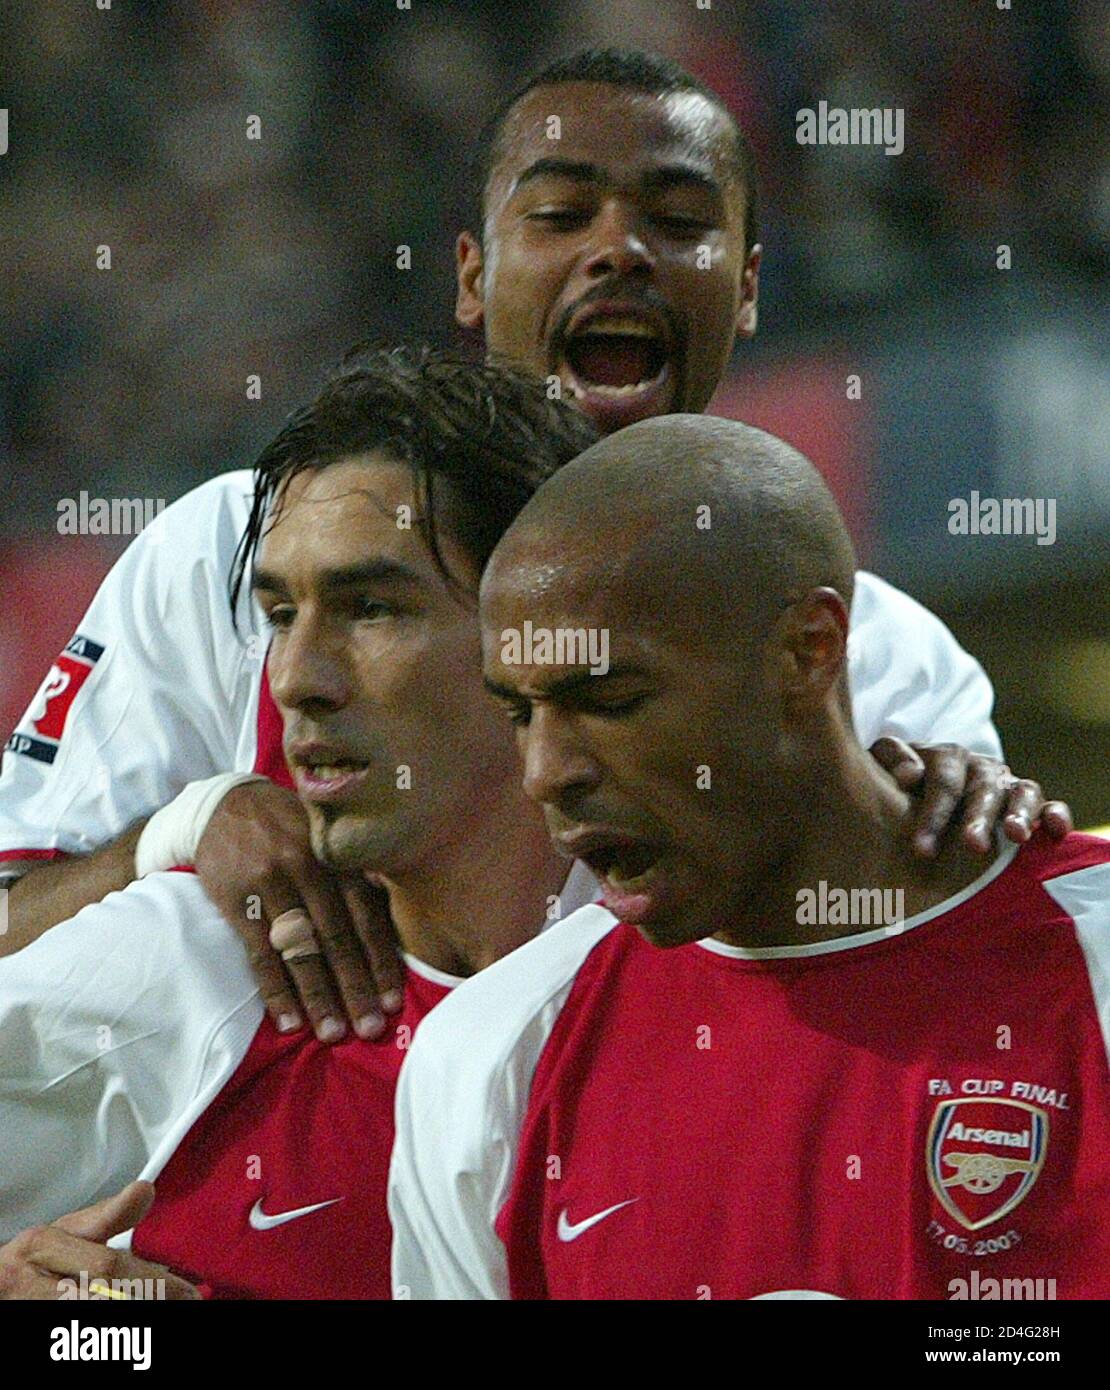 Arsenal's Robert Pires (L) celebrates his goal against Southampton with  team mates Ashley Cole (top) and Thierry Henry during the FA Cup final at  the Millennium Stadium in Cardiff May 17, 2003.